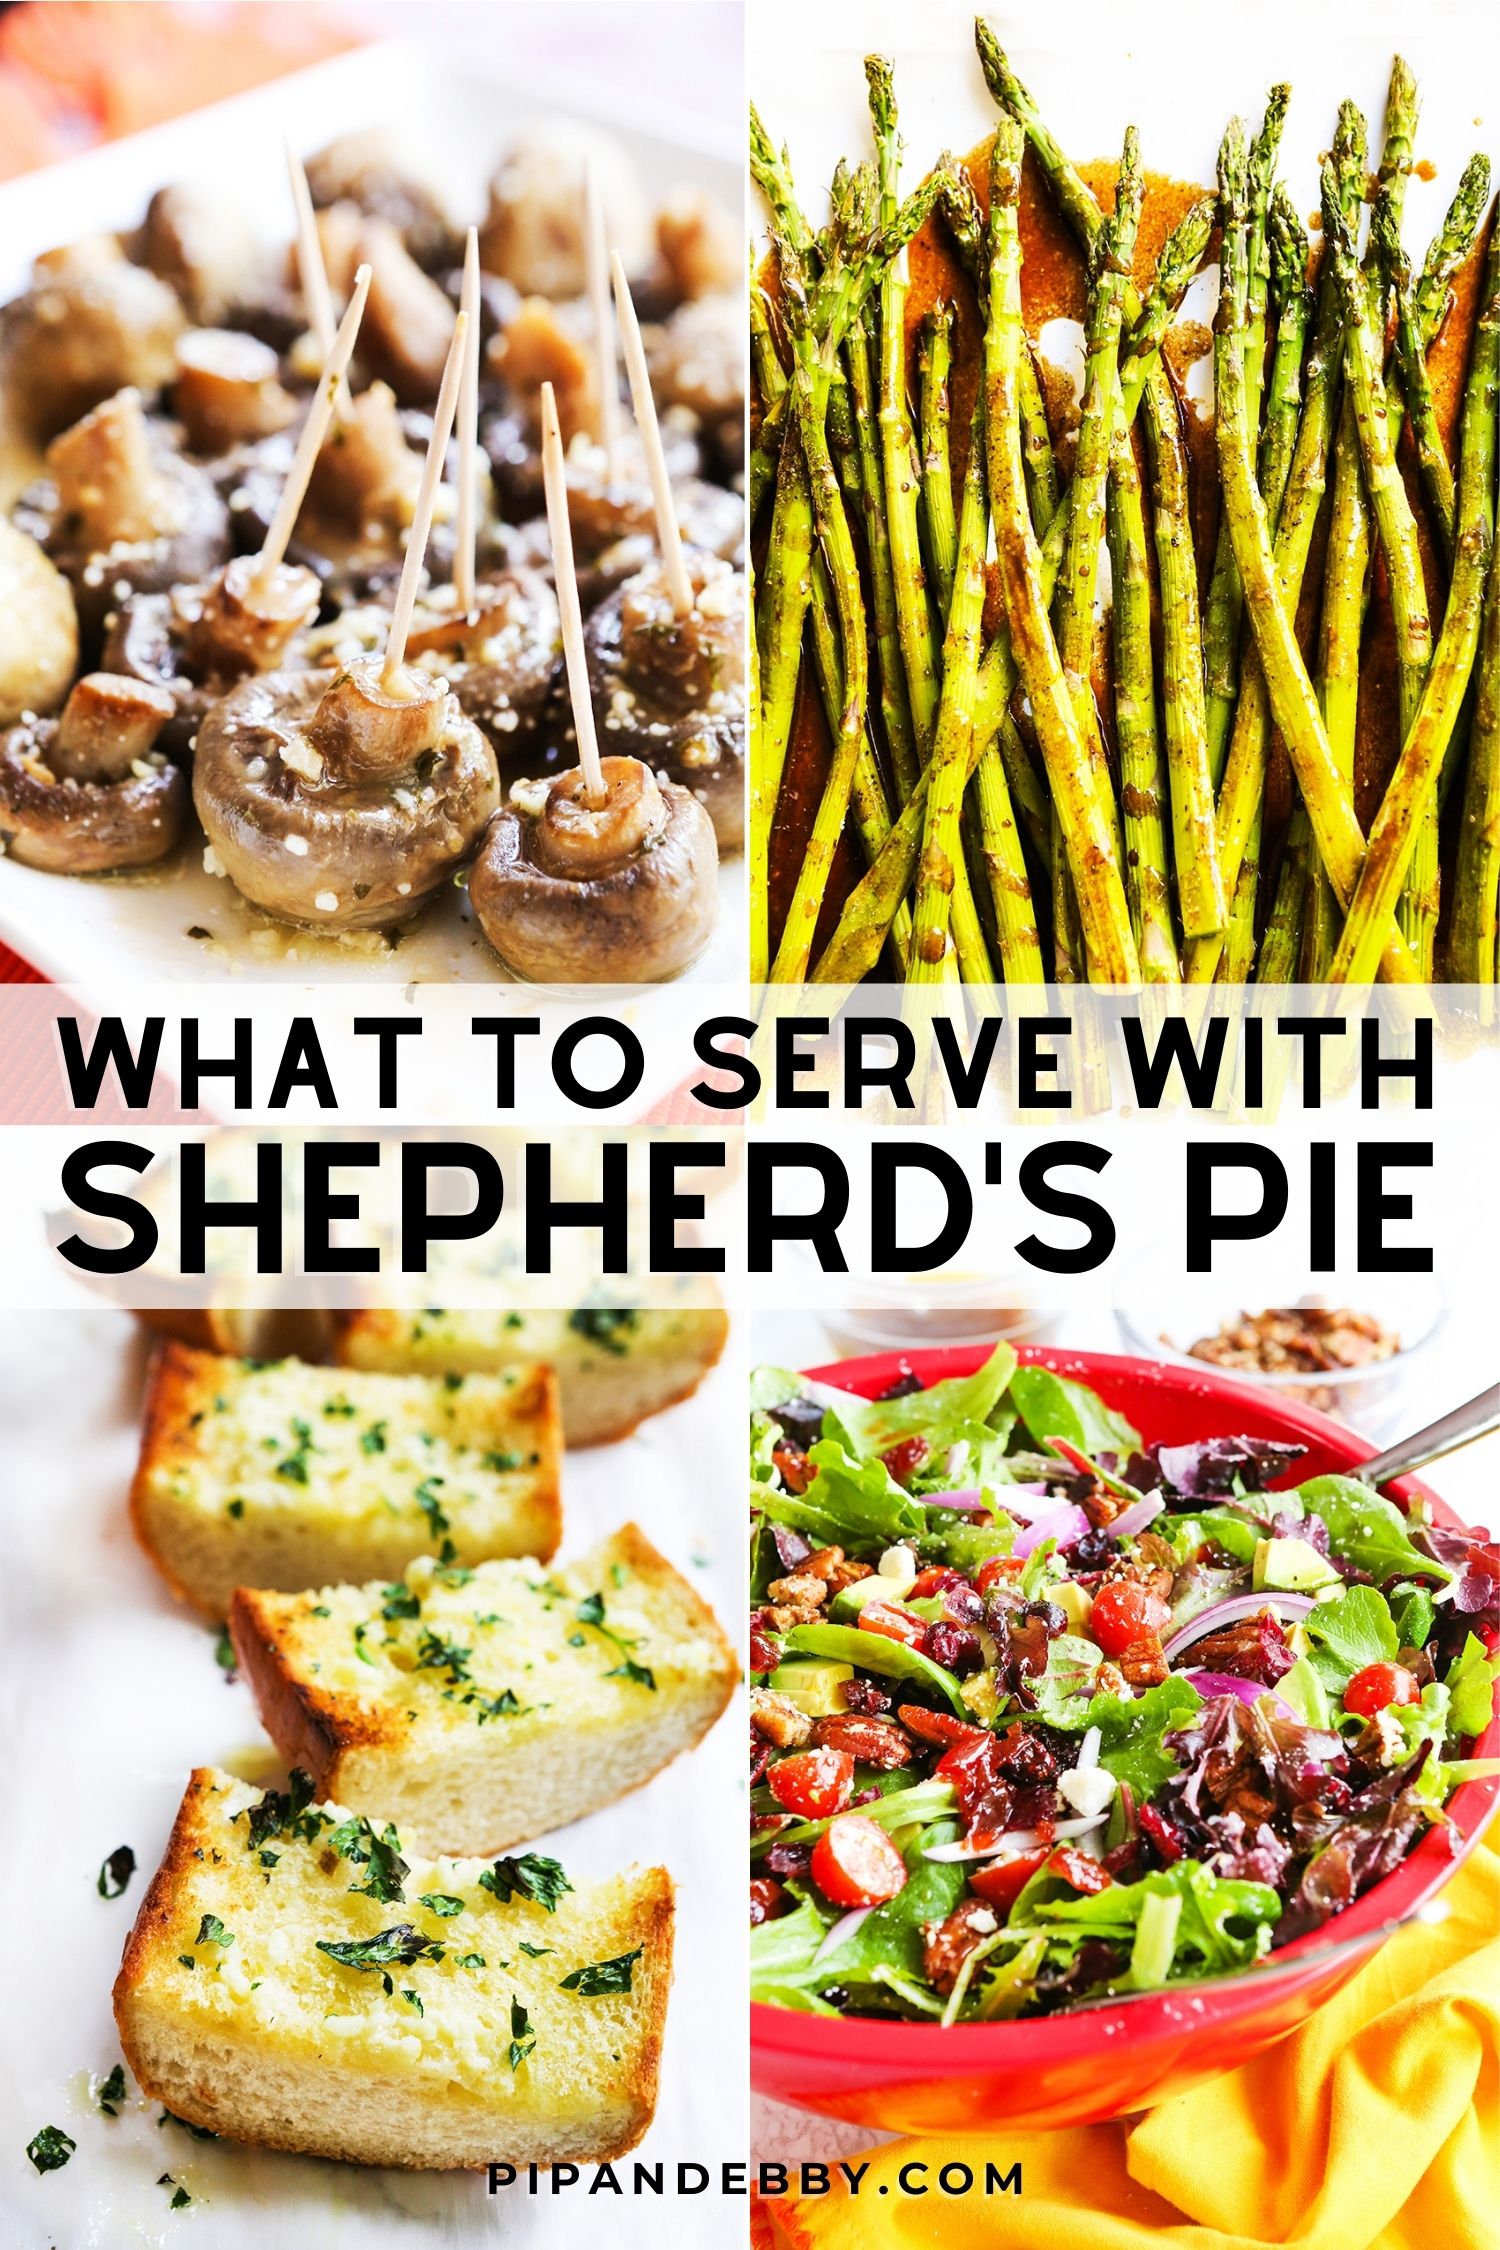 Four food photos in a grid with text overlay reading, "What to serve with shepherd's pie."